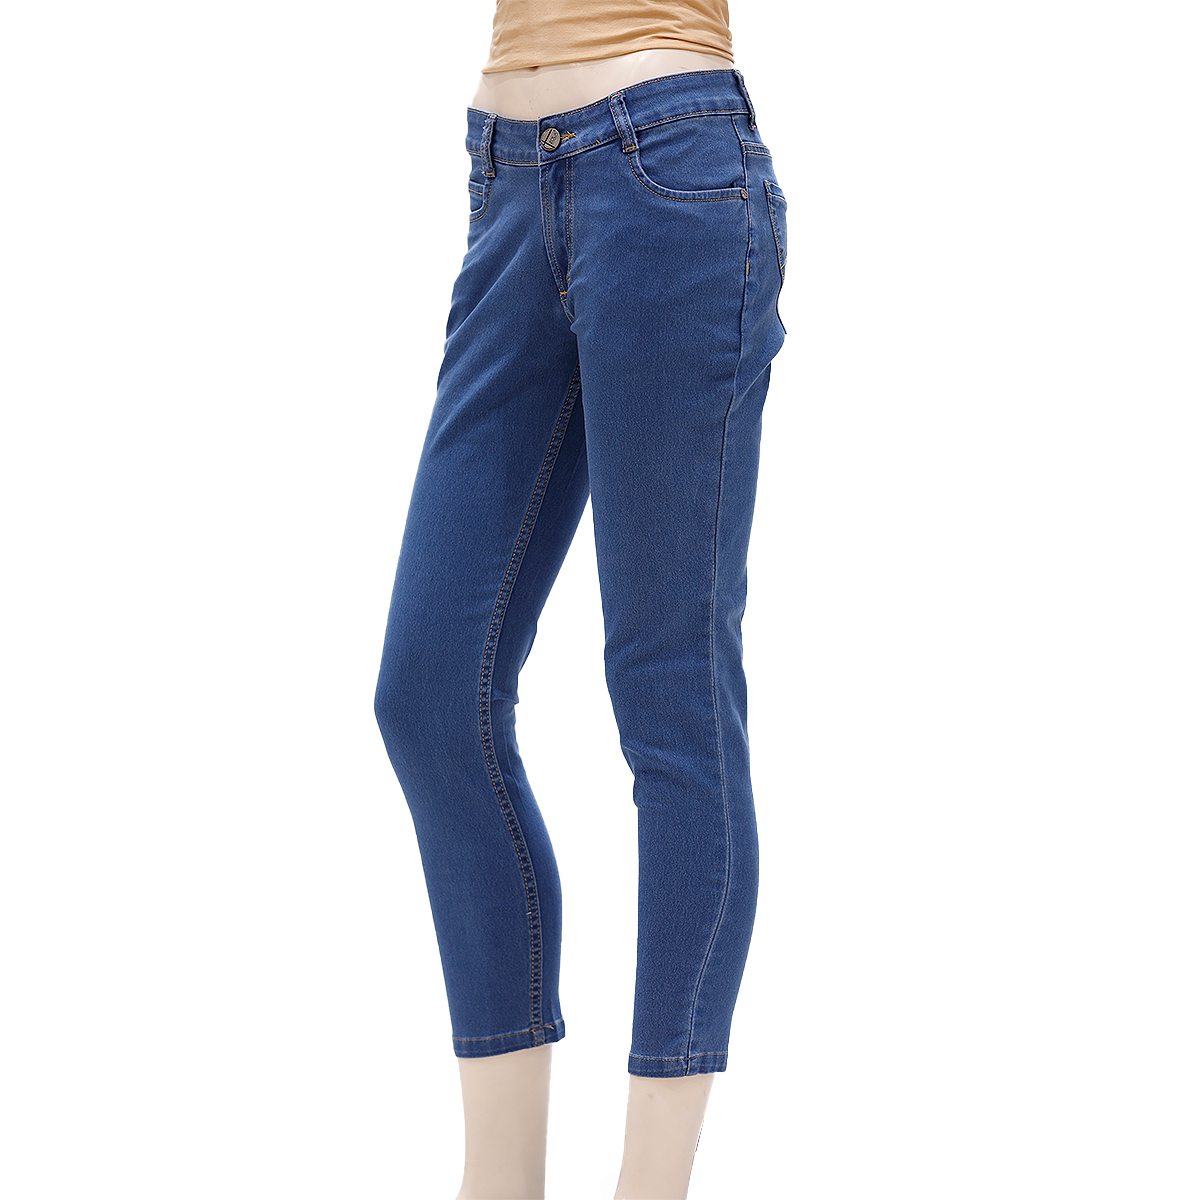 Zola Ankle Length Mid Waist Silky Finished Jeans With 1 Button Fly Front Zip Opening - Stone/Mid Blue, Size-36